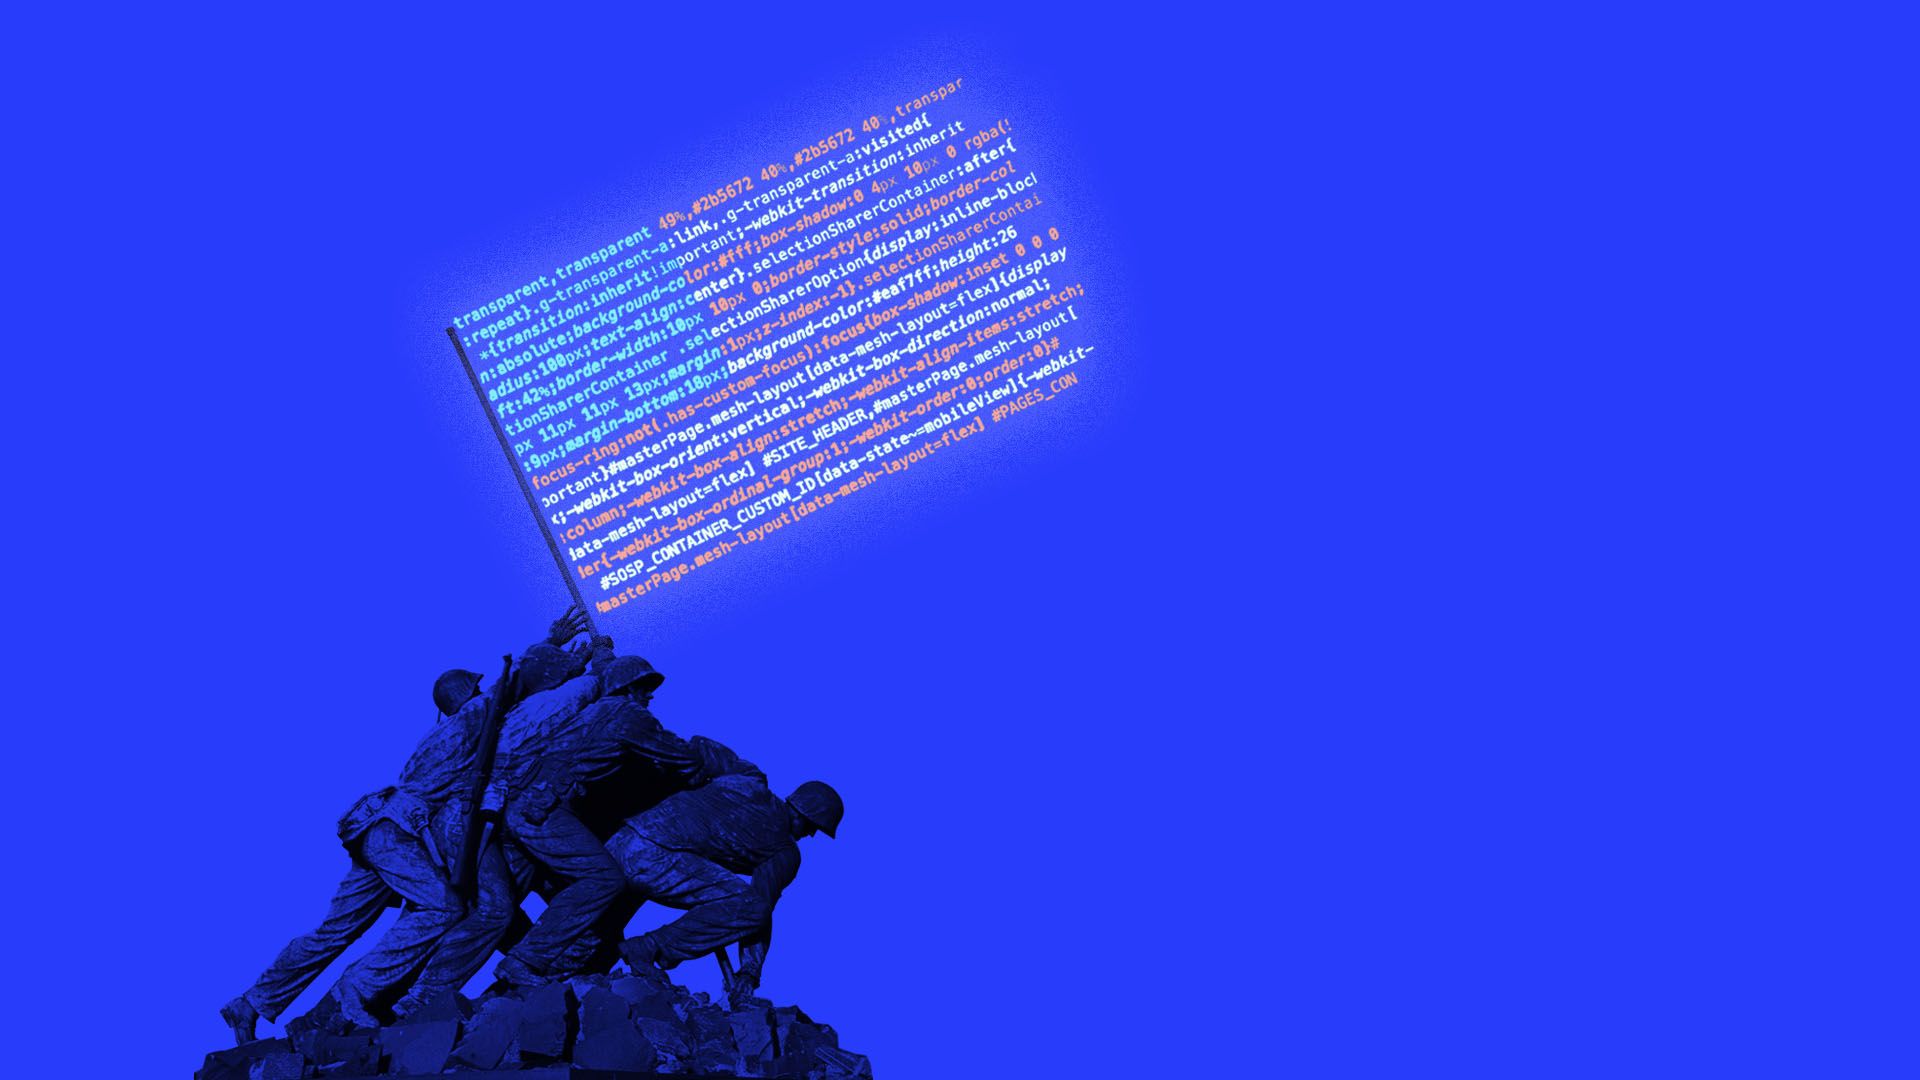 Illustration of Iwo Jima American flag raising with the flag in code